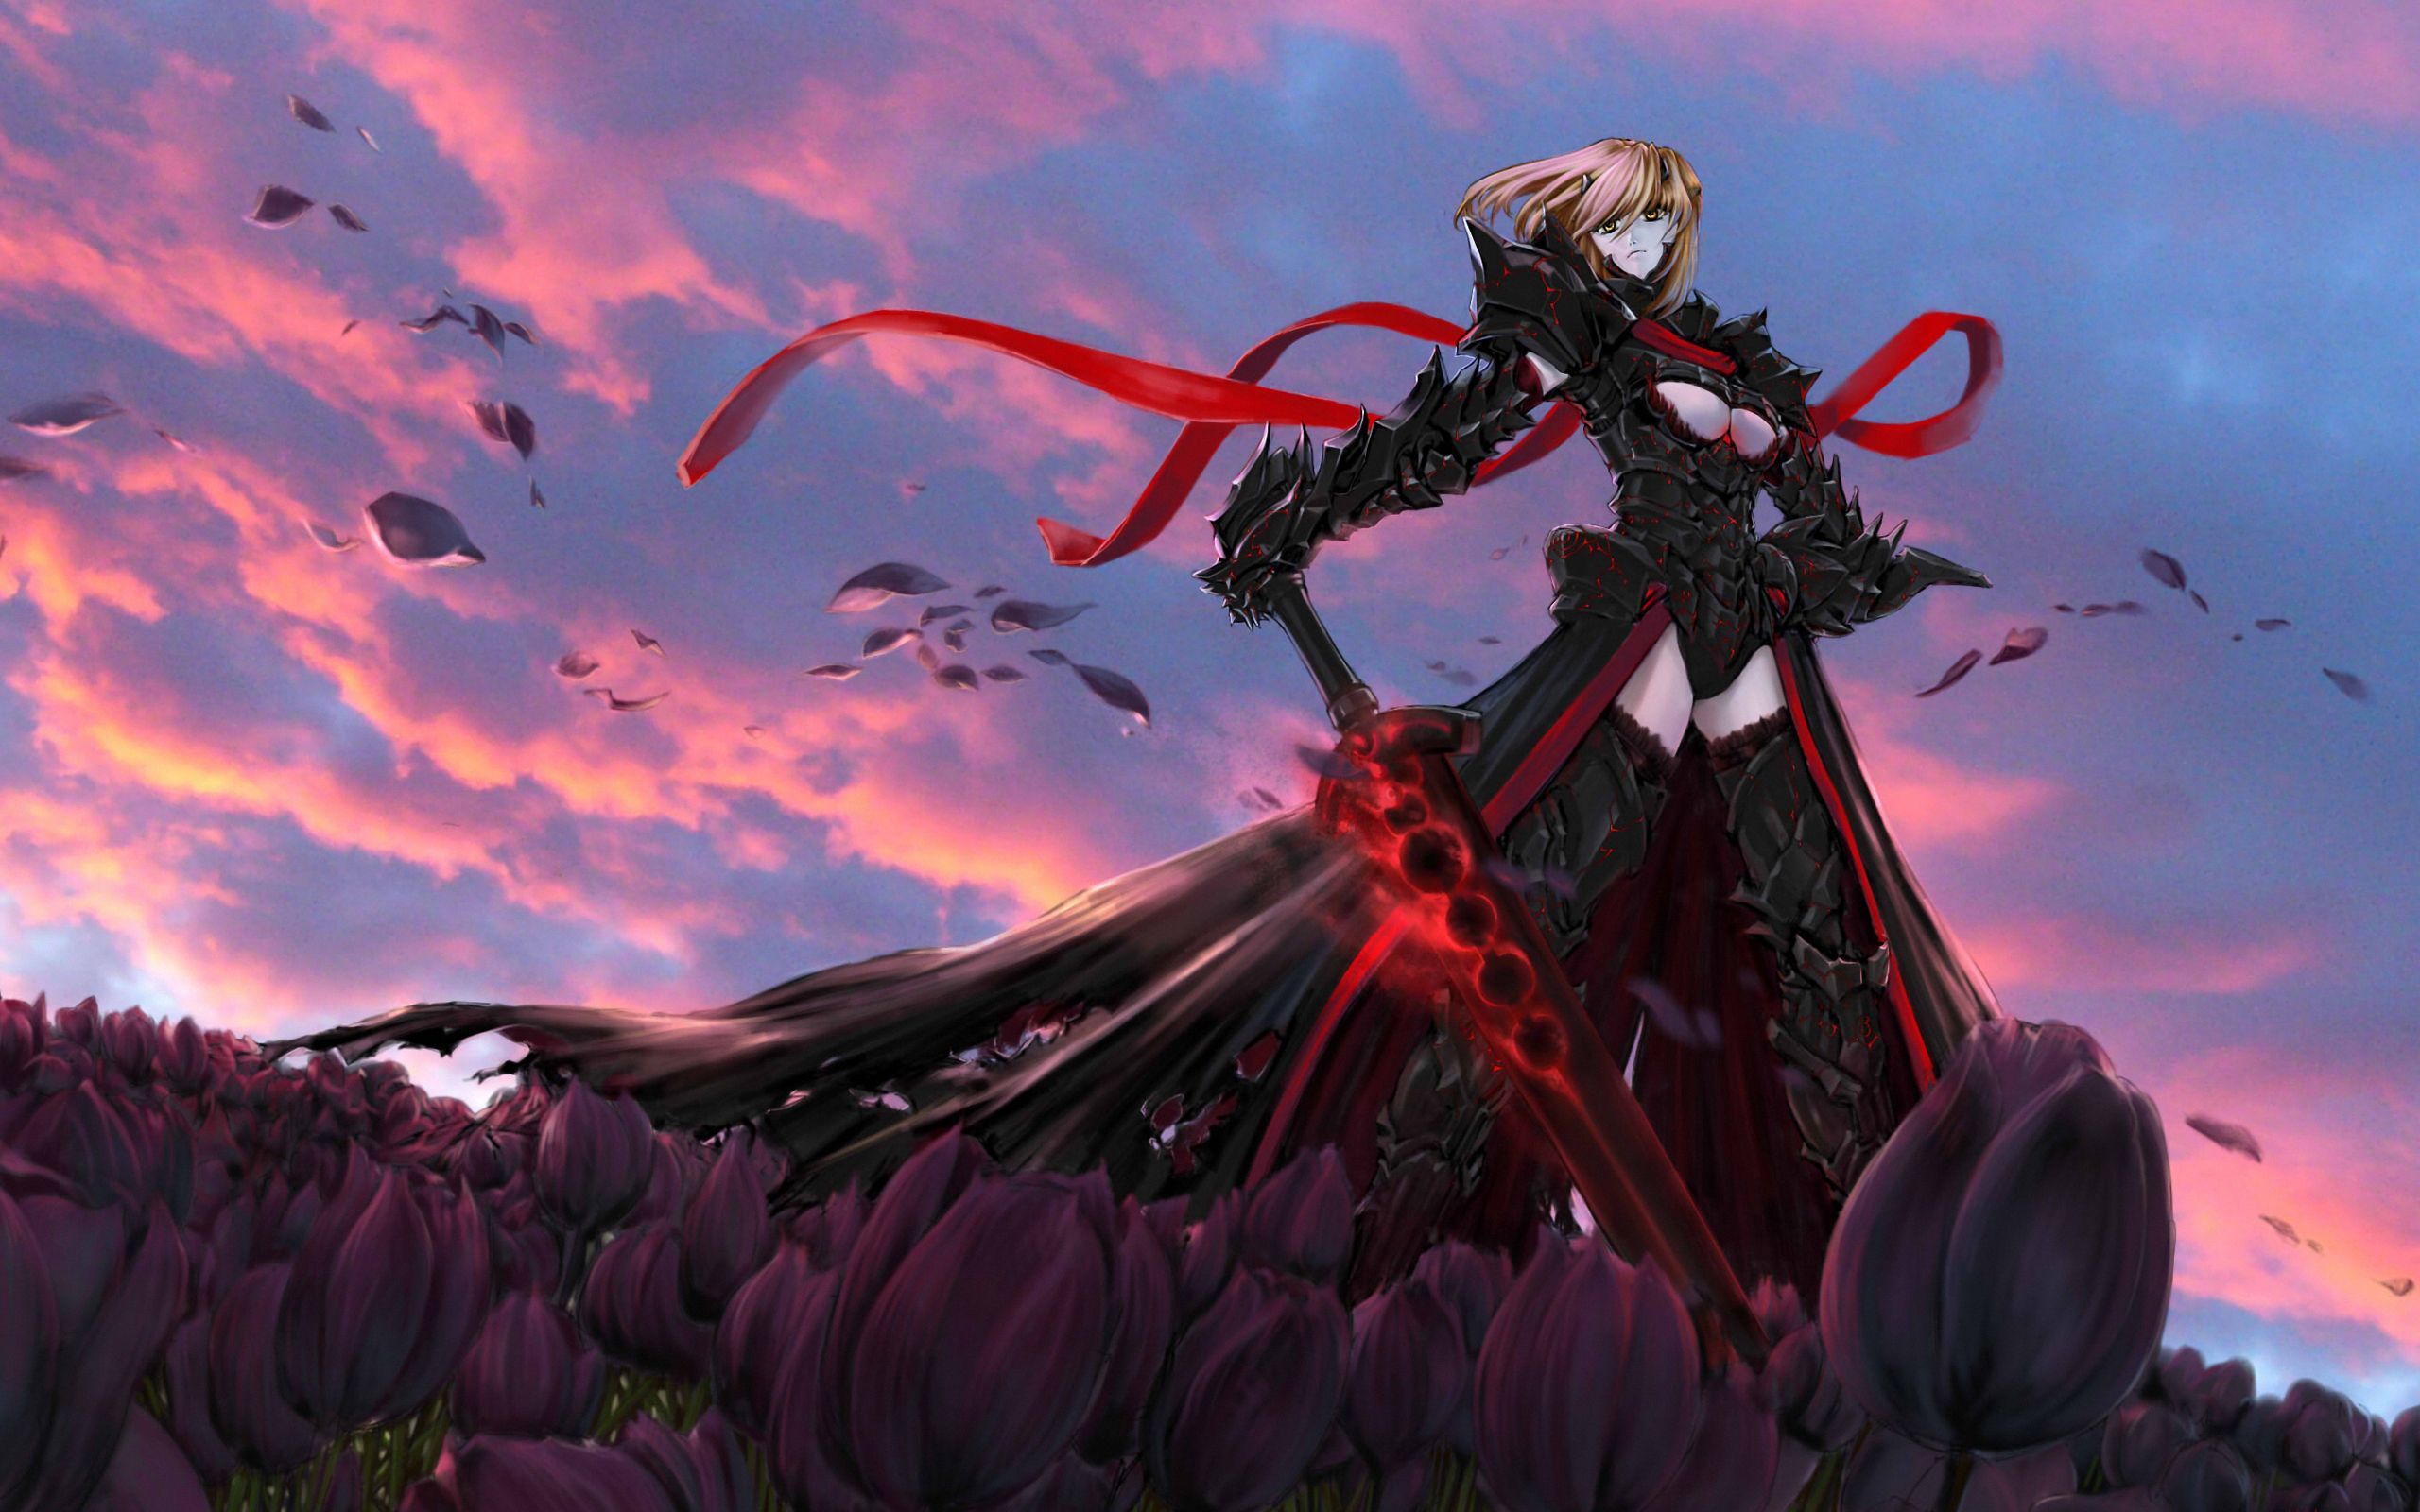 Fate / Stay Night Computer Wallpapers, Desktop Backgrounds